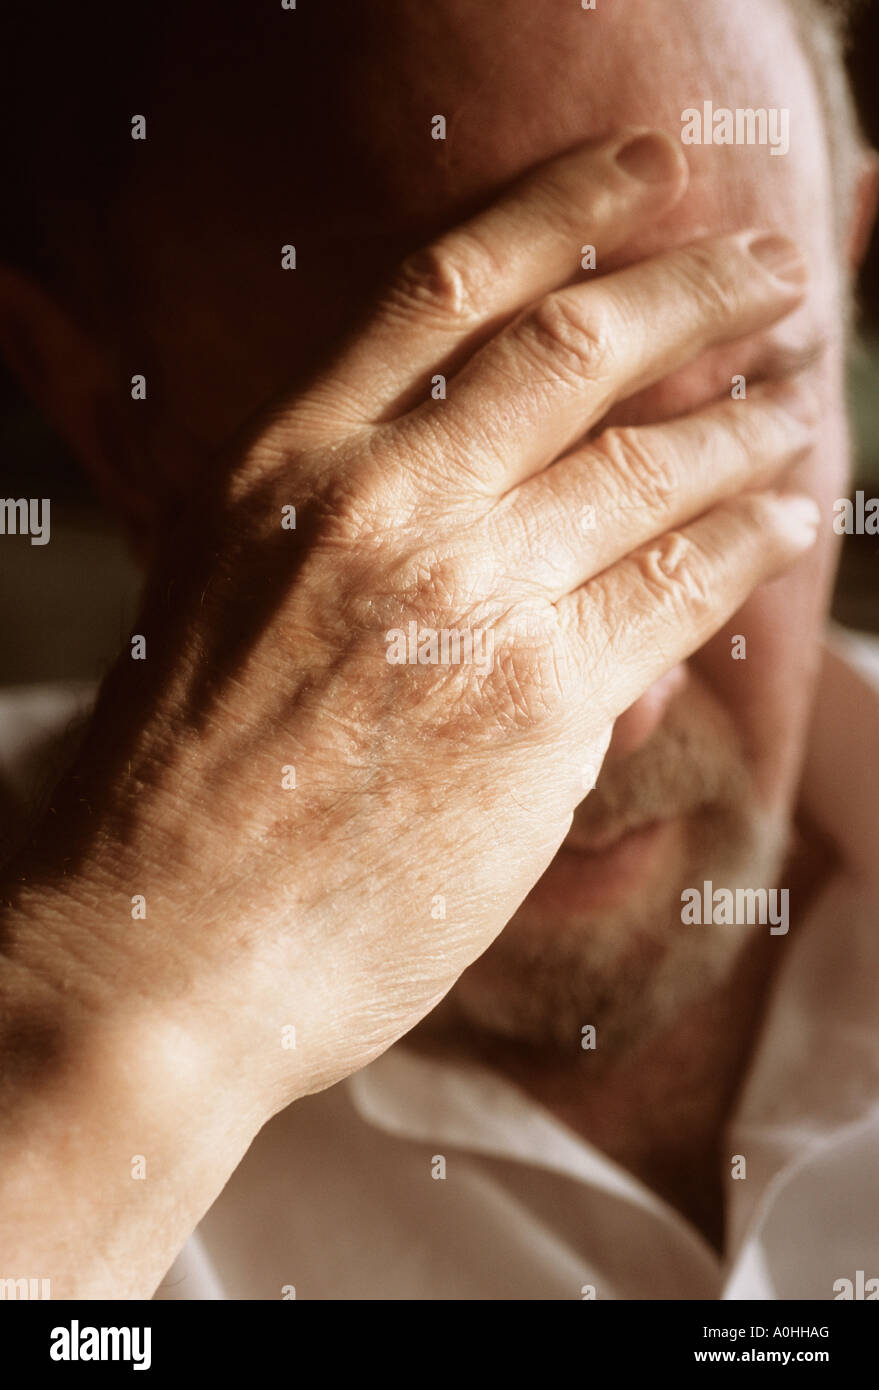 Close up of elderly man with his hand to his head. Portrait of male deep in thought. Serious, tired, depressed, worried old age pensioner. Stock Photo